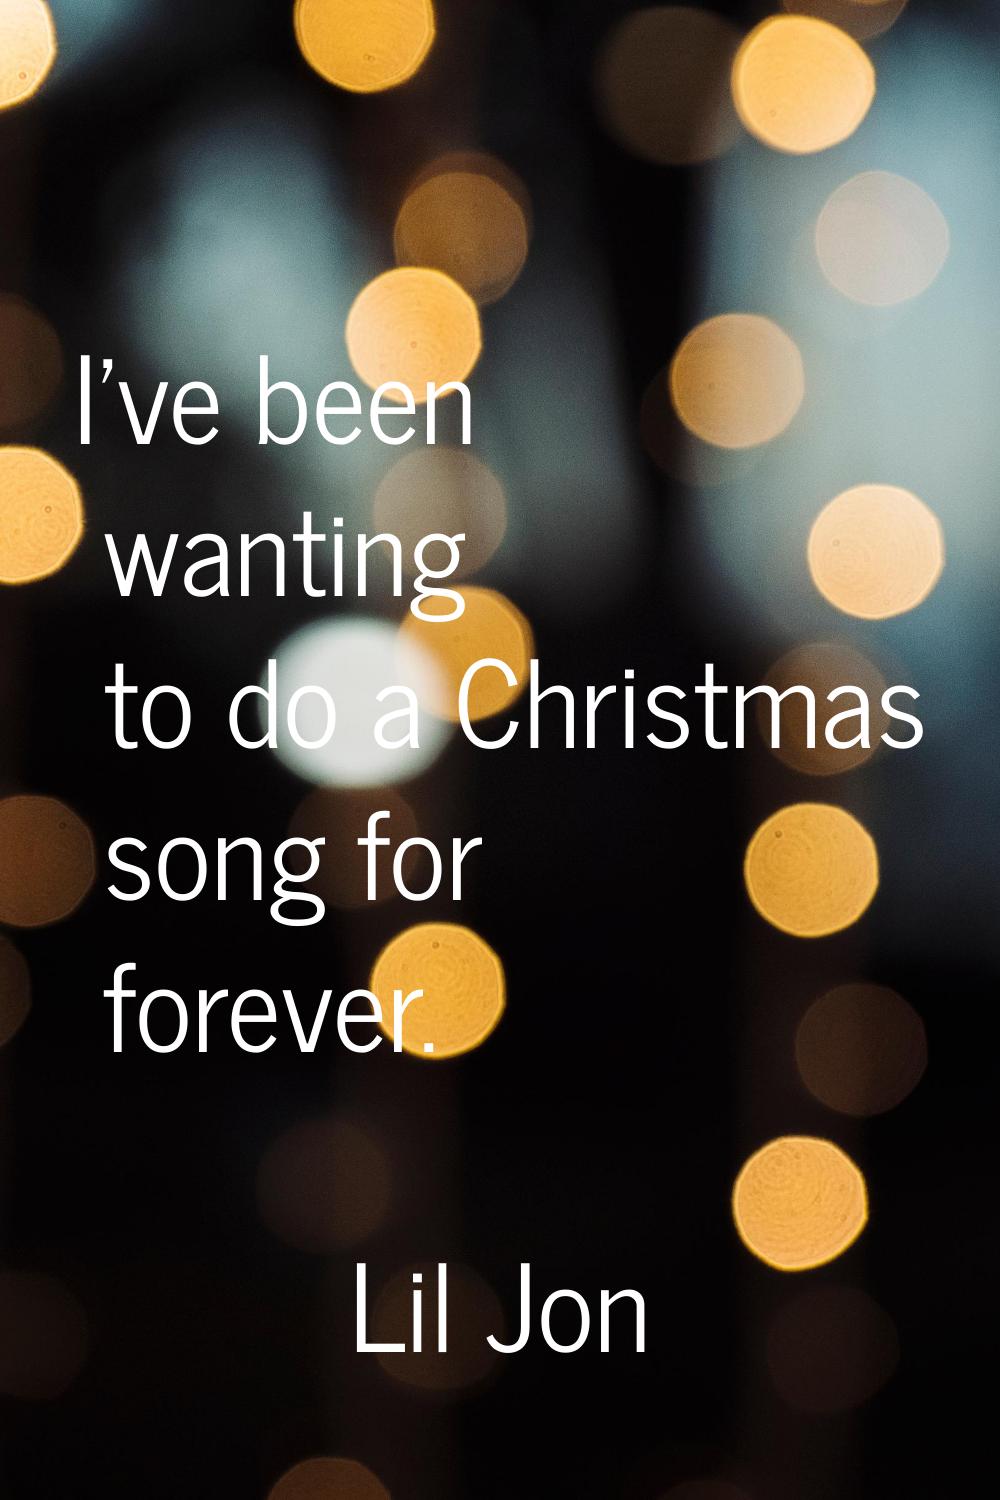 I've been wanting to do a Christmas song for forever.